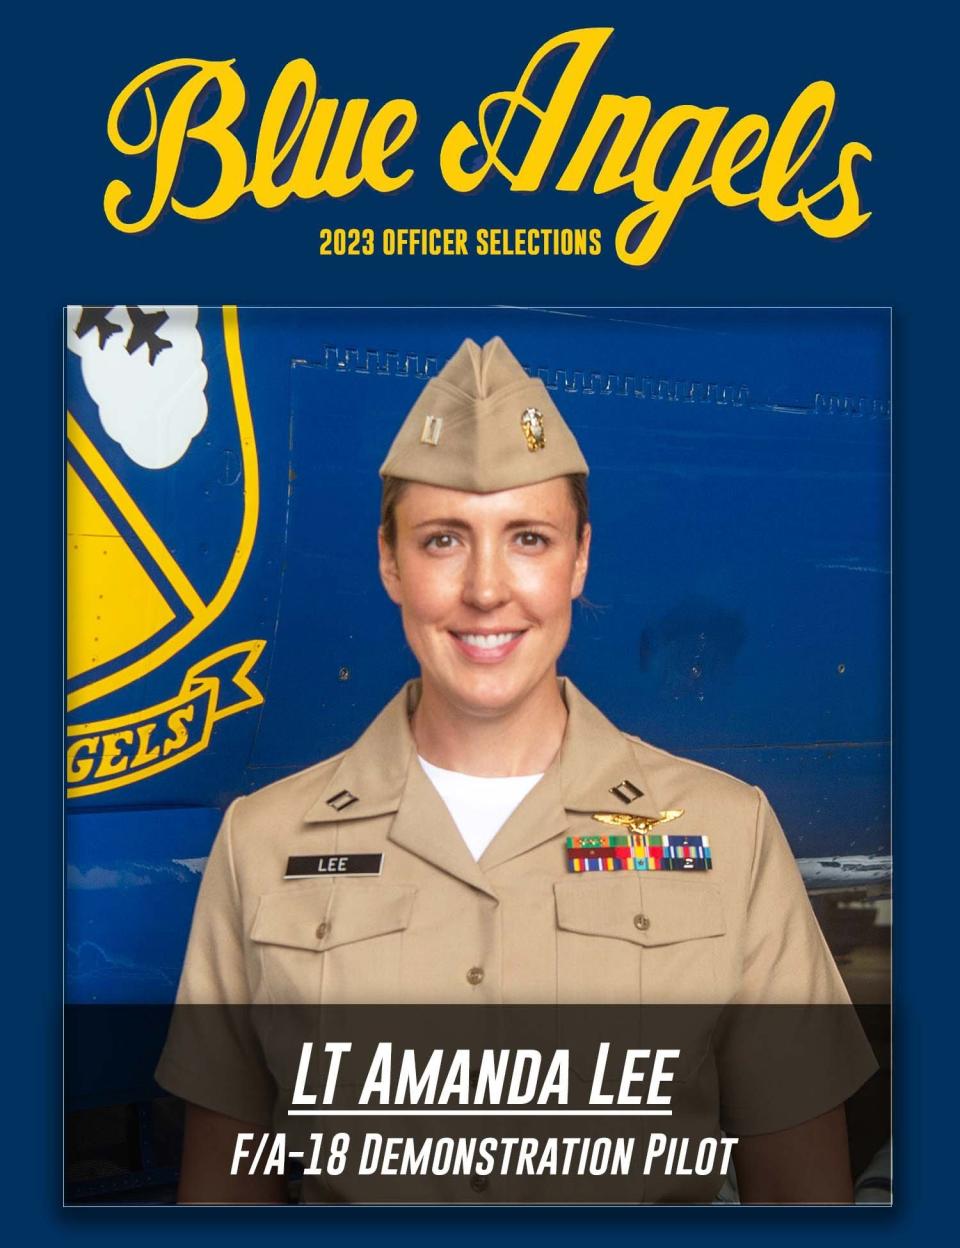 Lt. Amanda Lee, of Mounds View, Minn., has been named the Blue Angels first woman F/A-18E/F pilot in Blue Angel history. She is currently assigned to the “Gladiators” of Strike Fighter Squadron (VFA) 106.